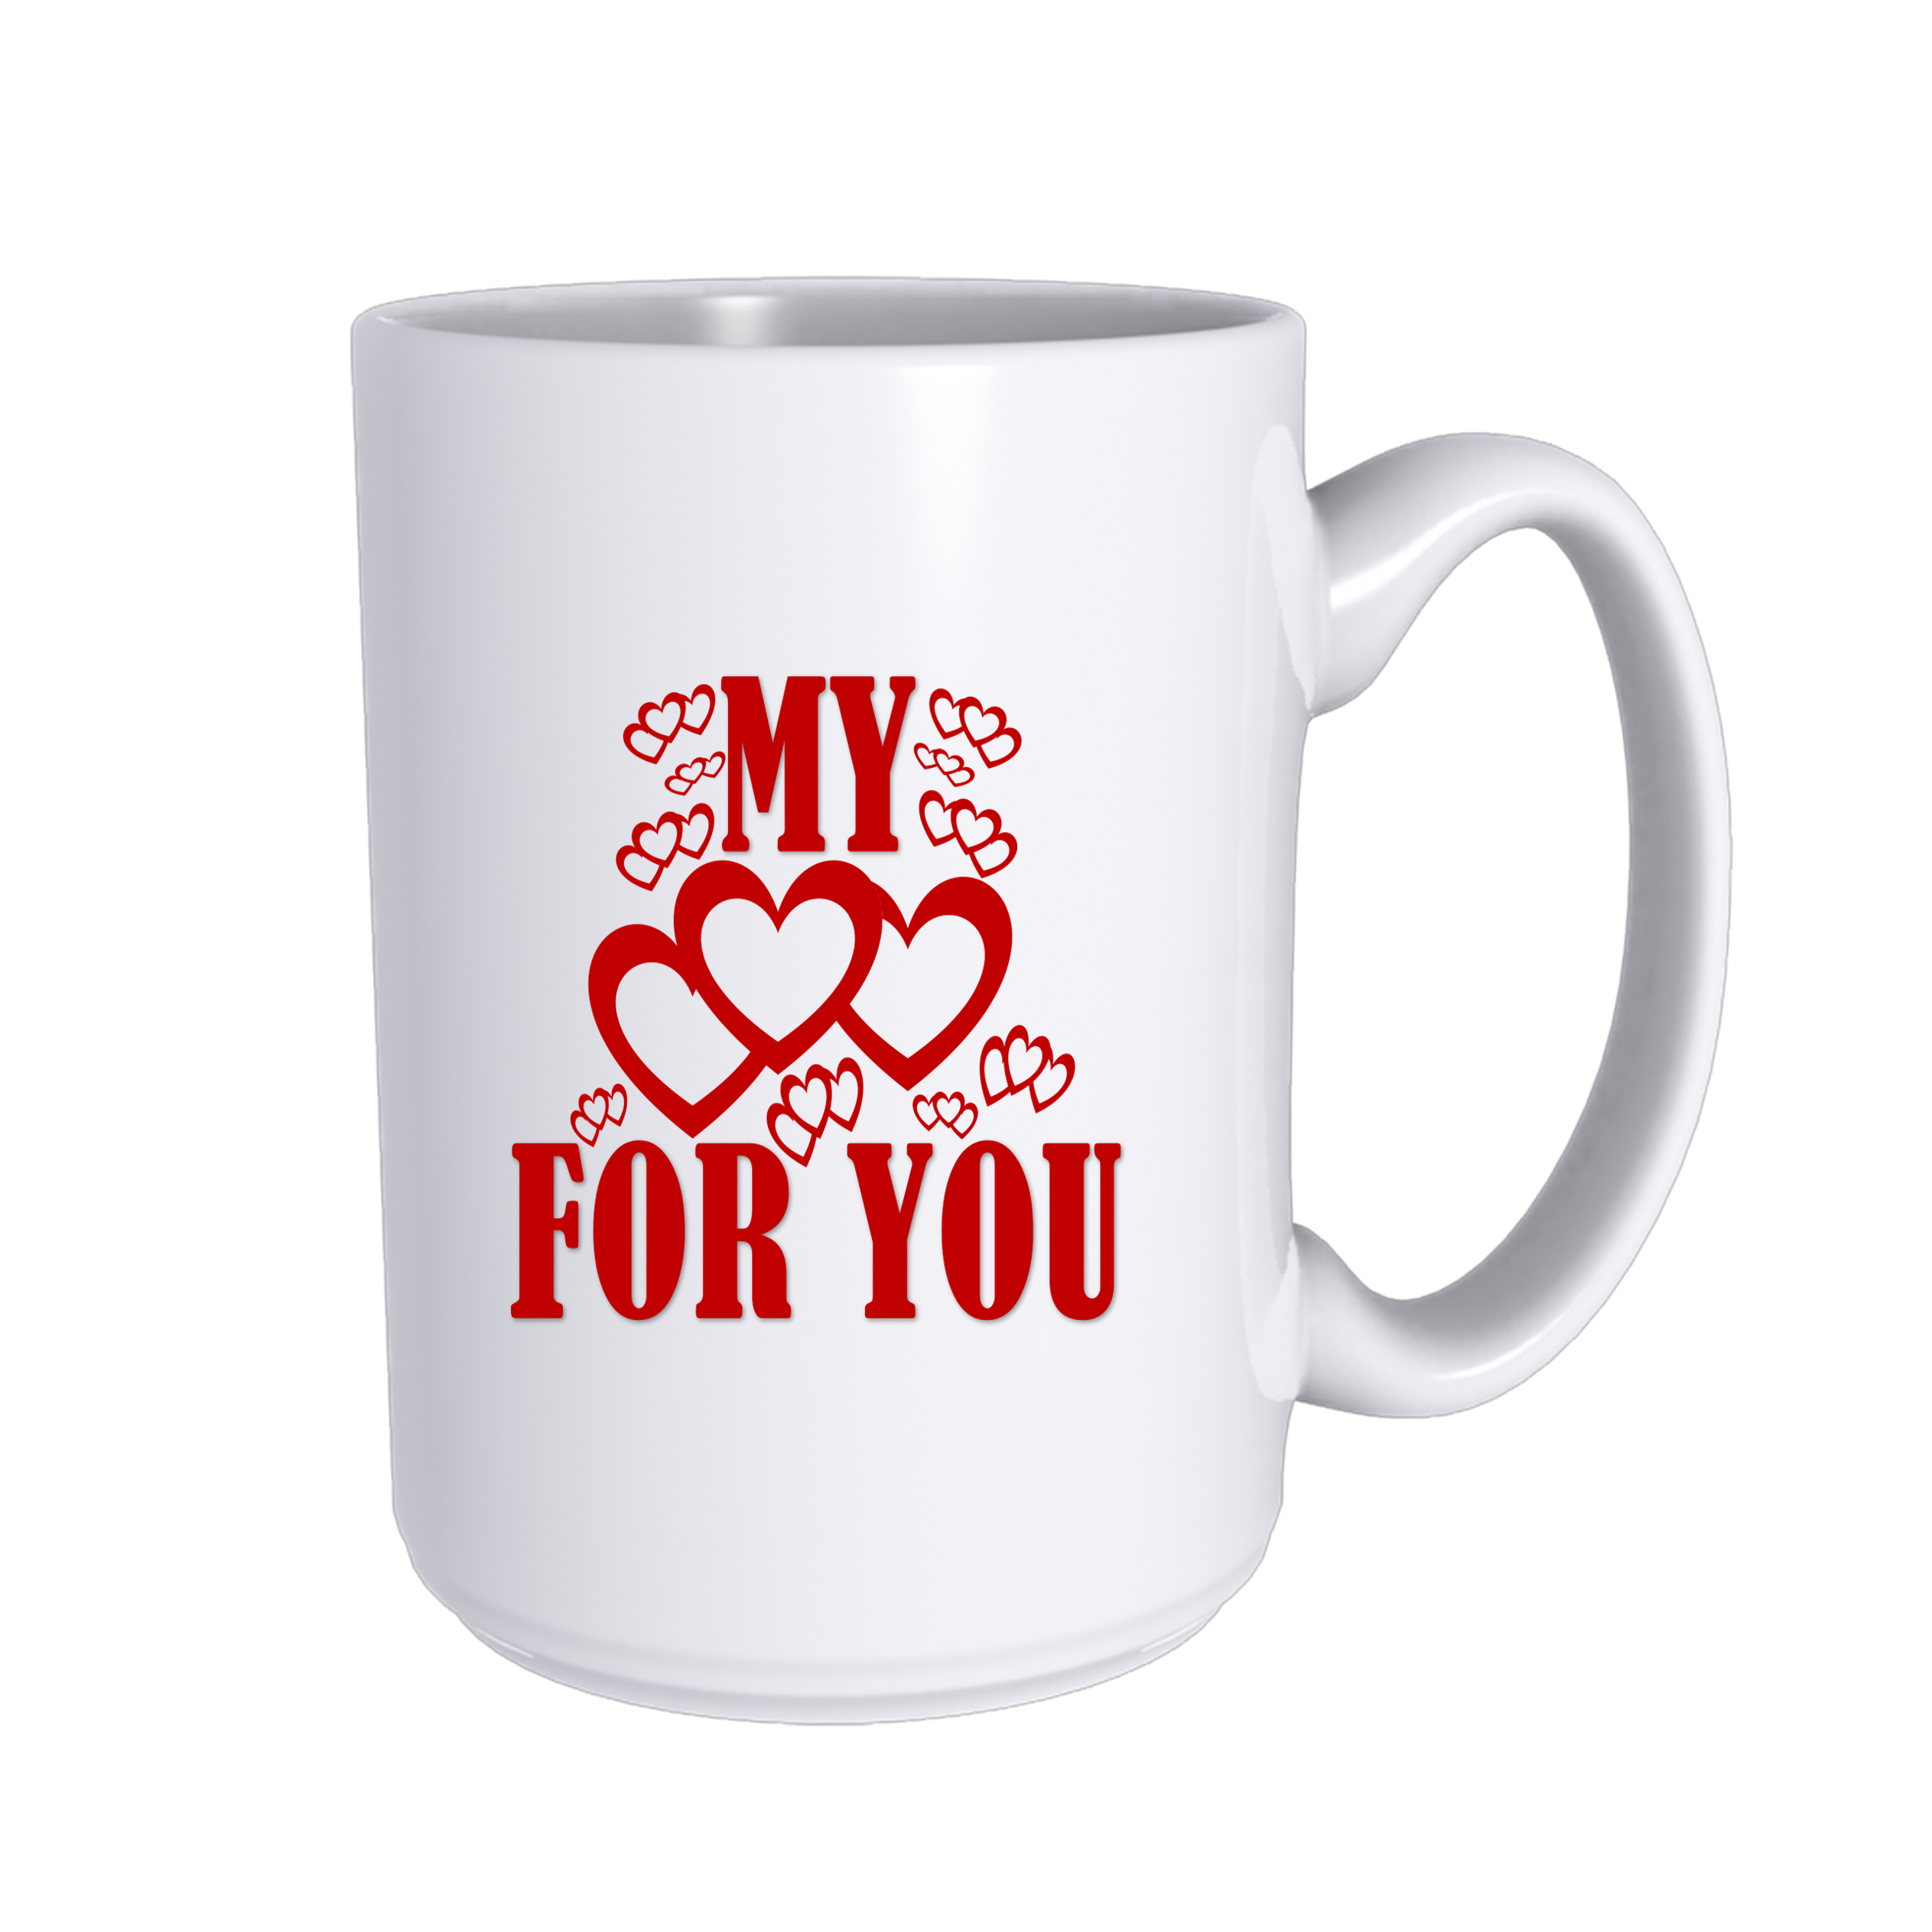 MY HEART FOR YOU MUG | LOVE SAYING MUGS SET_VALENTINE'S DAY BEST GIFTS